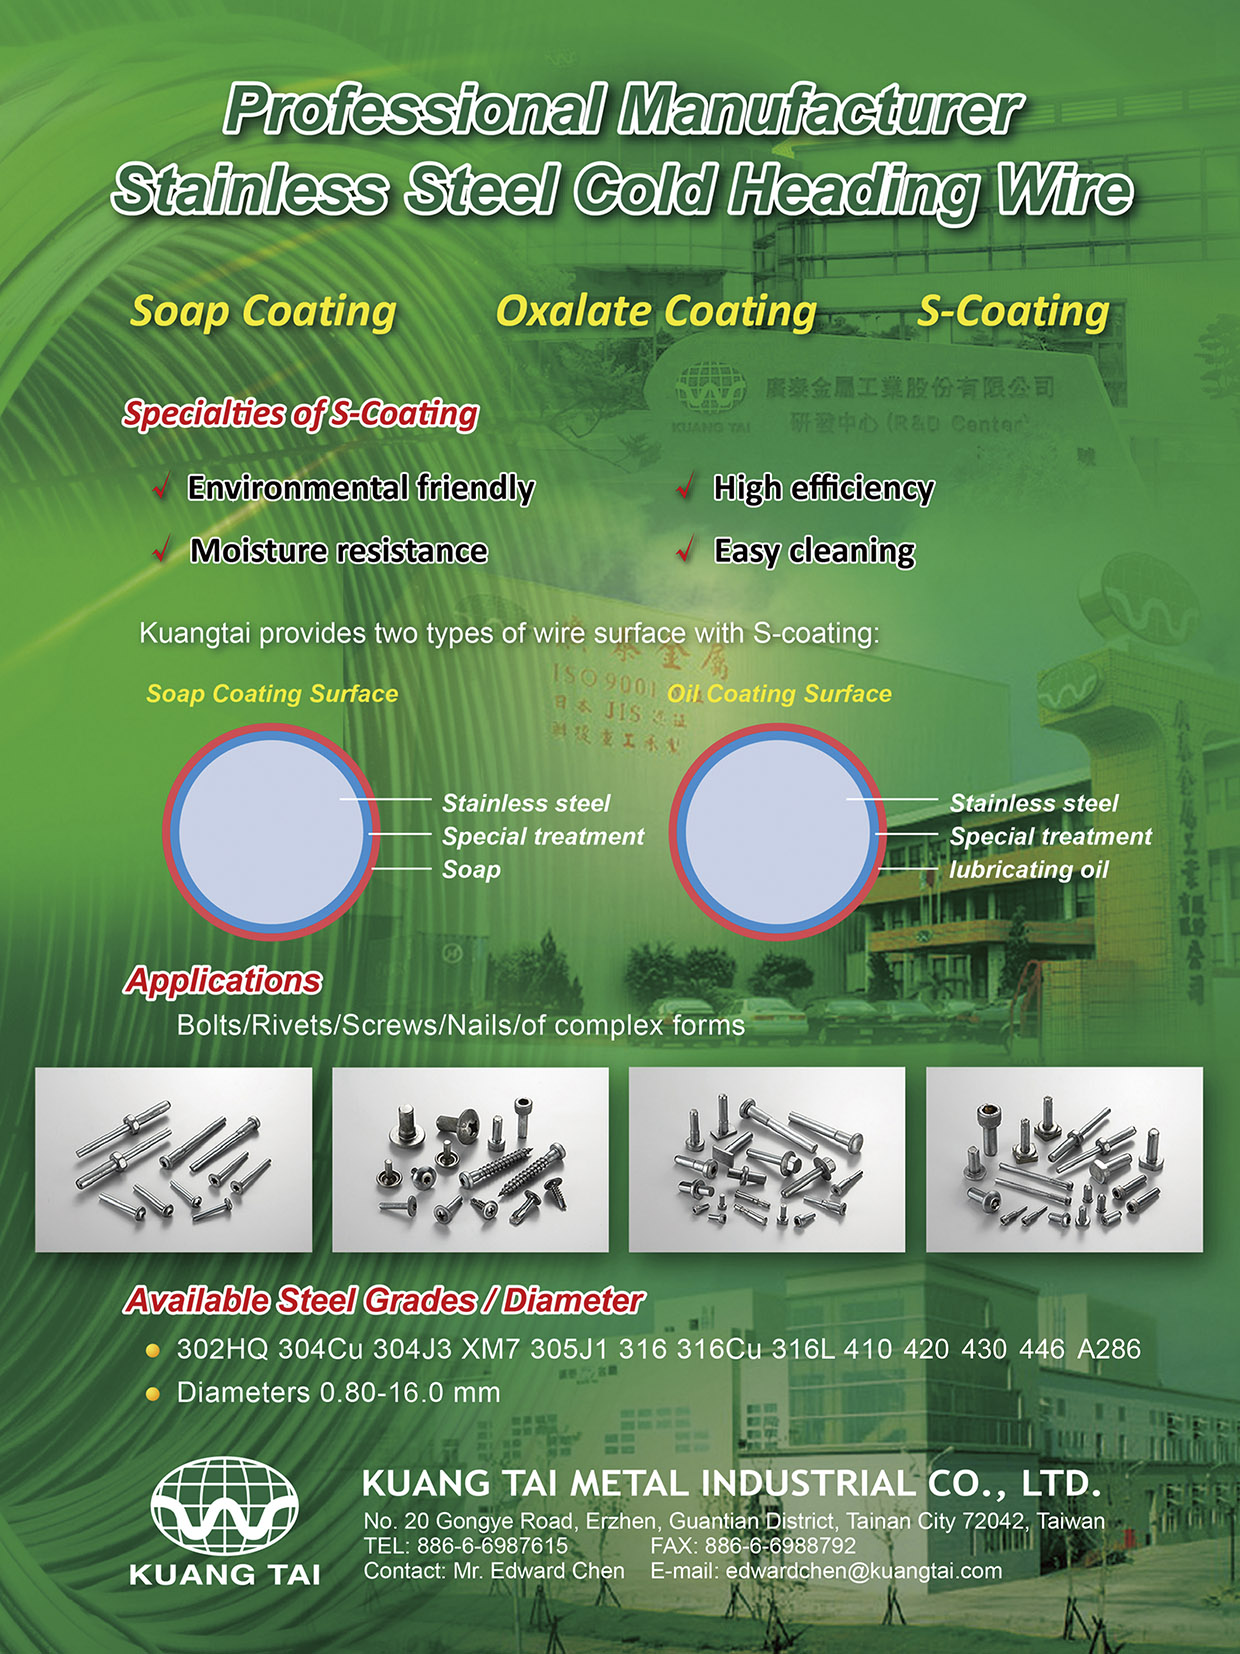 KUANG TAI METAL INDUSTRIAL CO., LTD. , Stainless Steel Cold Heading Wire , Stainless Steel Wire & Rod